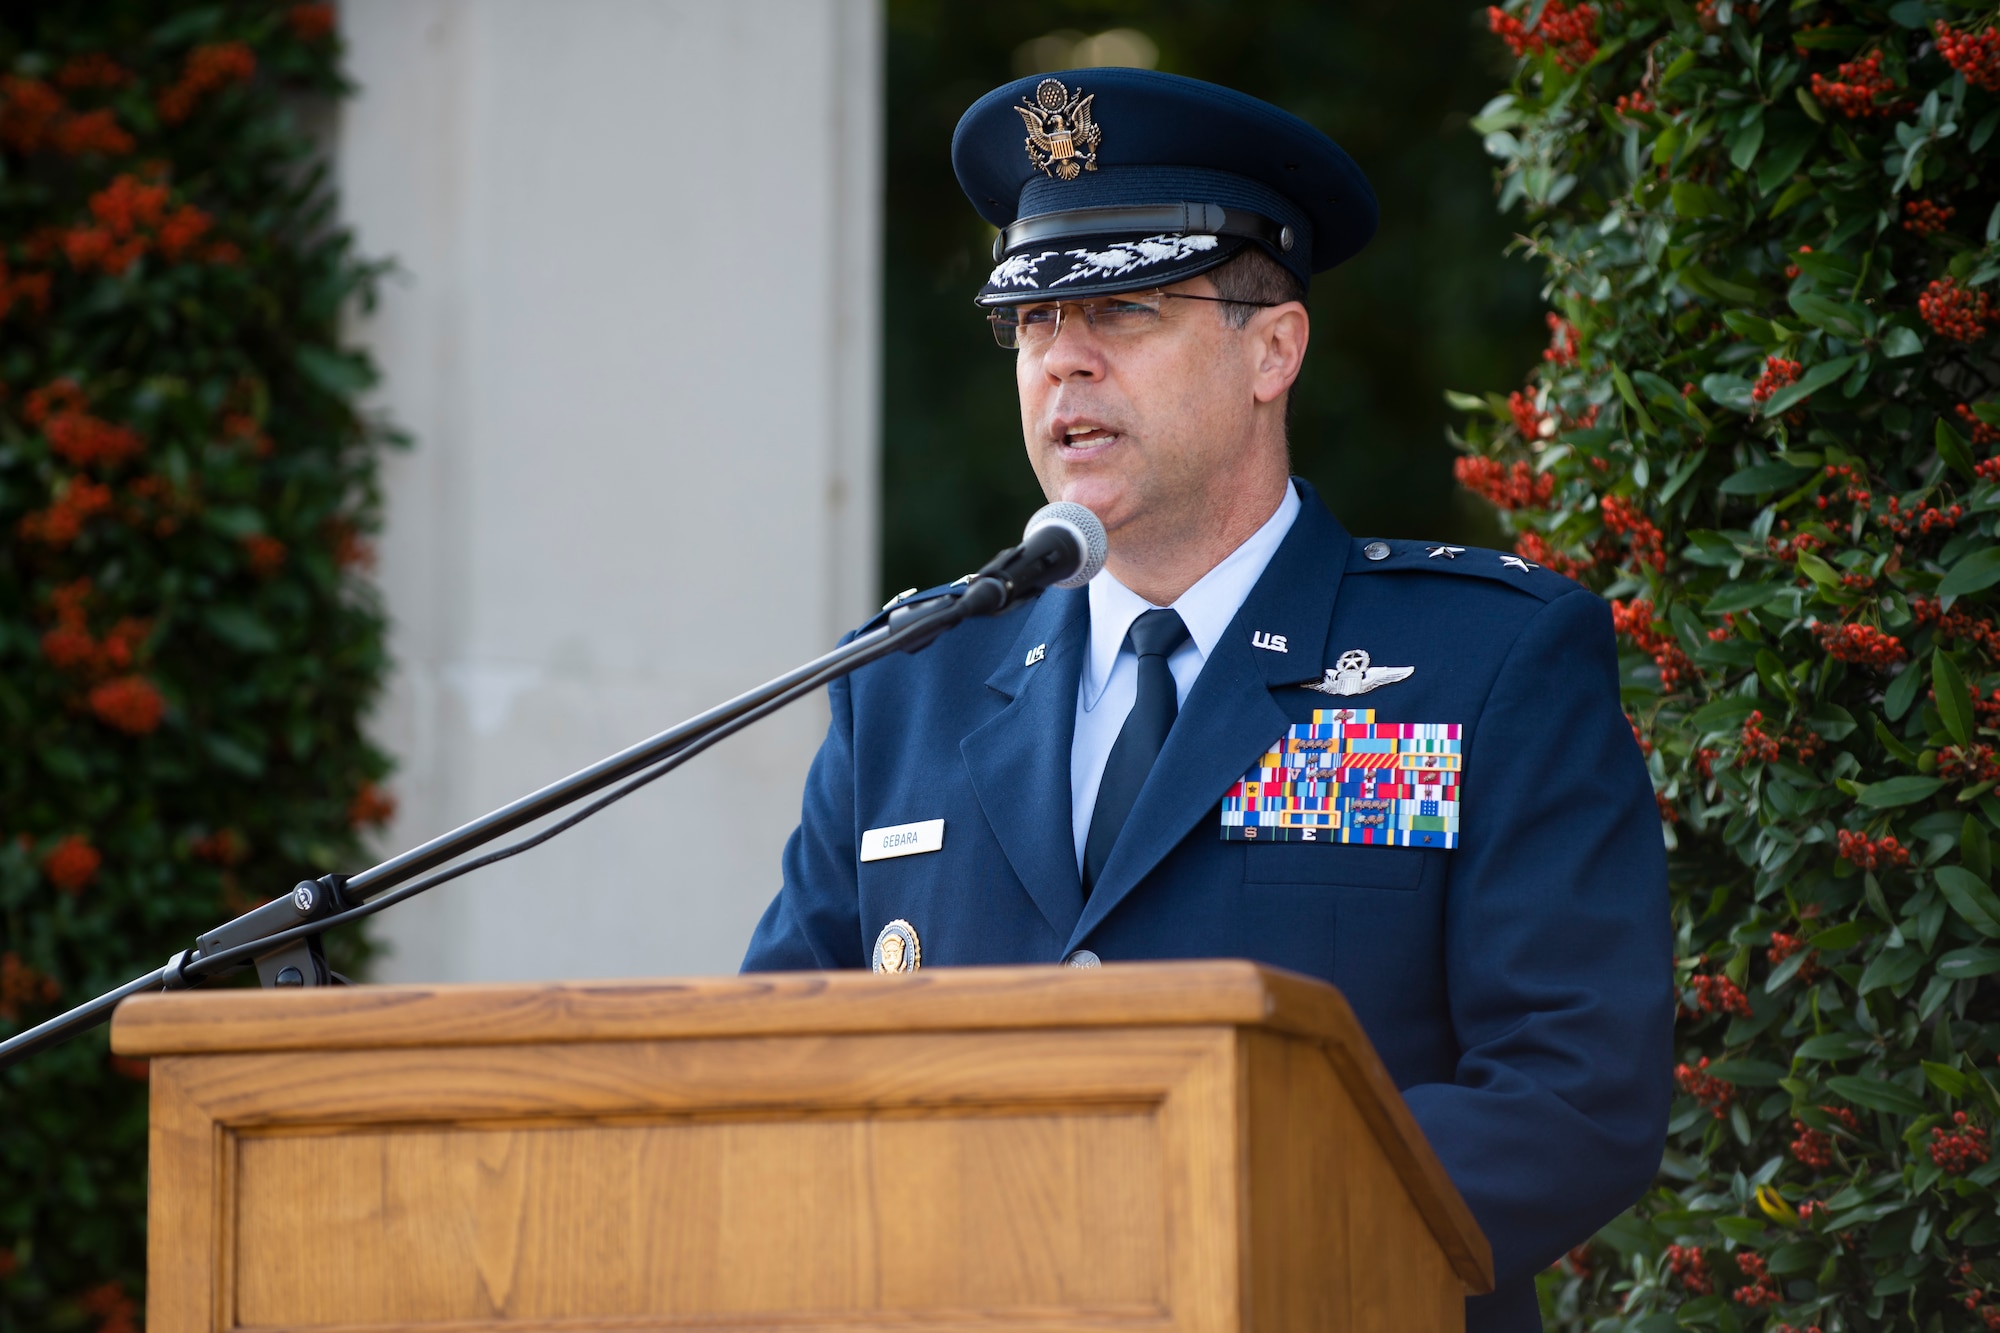 U.S. Air Force Maj. Gen. Andrew Gebara, 8th Air Force and J-GSOC commander, speaks at the Cambridge American Cemetery and Memorial, Madingley, England, Sept. 1, 2022. Leadership from the 501st Combat Support Wing joined the 8th Air Force commander and command chief, along with other U.S. Air Force leaders, to mark the 80th Anniversary of the formation of the Mighty Eighth Air Force and to commemorate those who gave their lives in the ultimate sacrifice. (U.S. Air Force photo by Senior Airman Jennifer Zima)